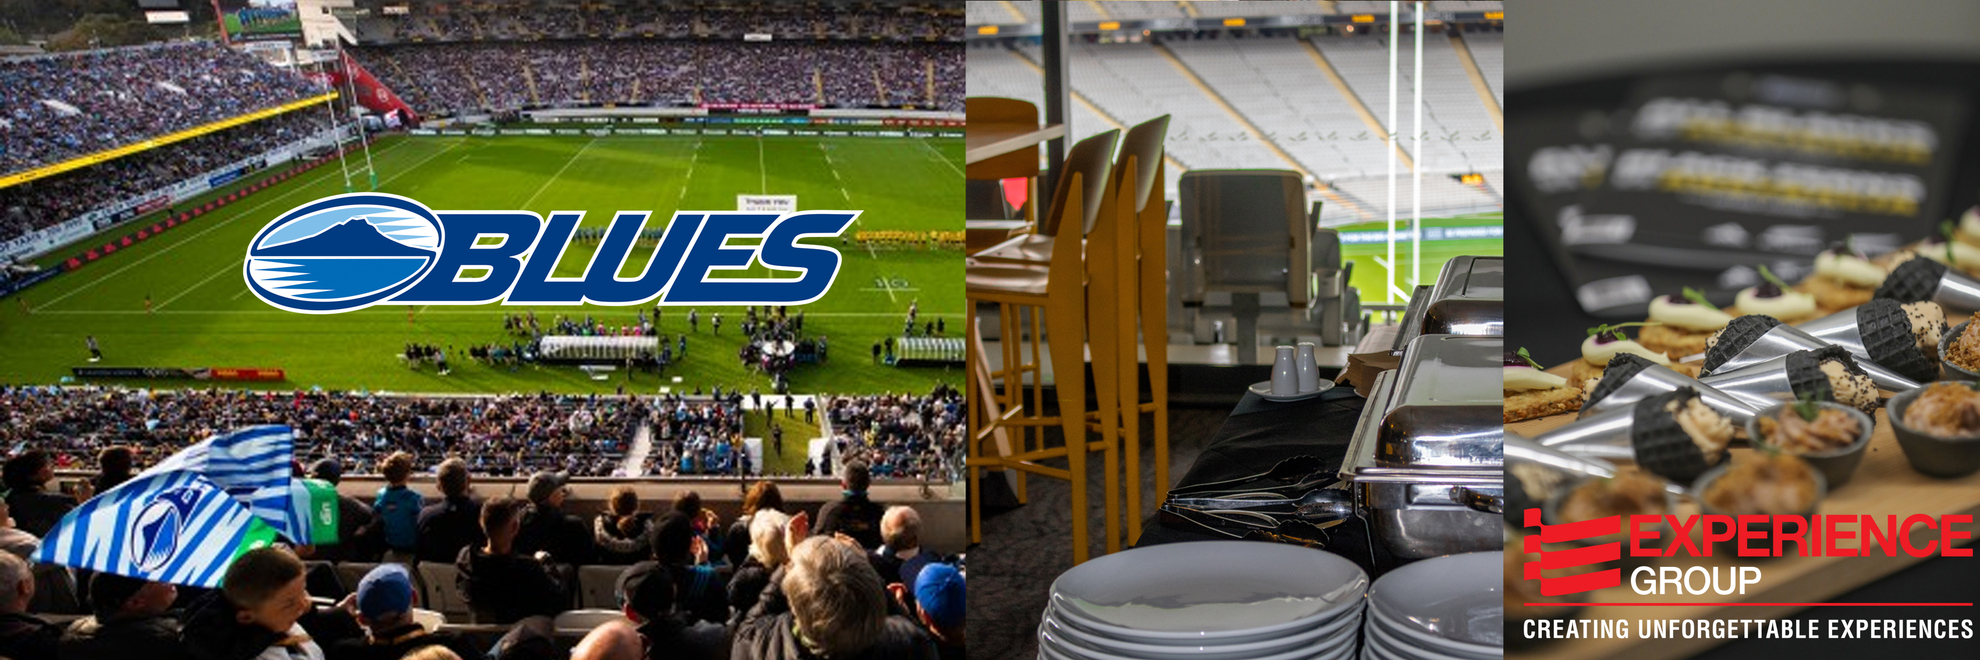 Blues Suites - Experience Group